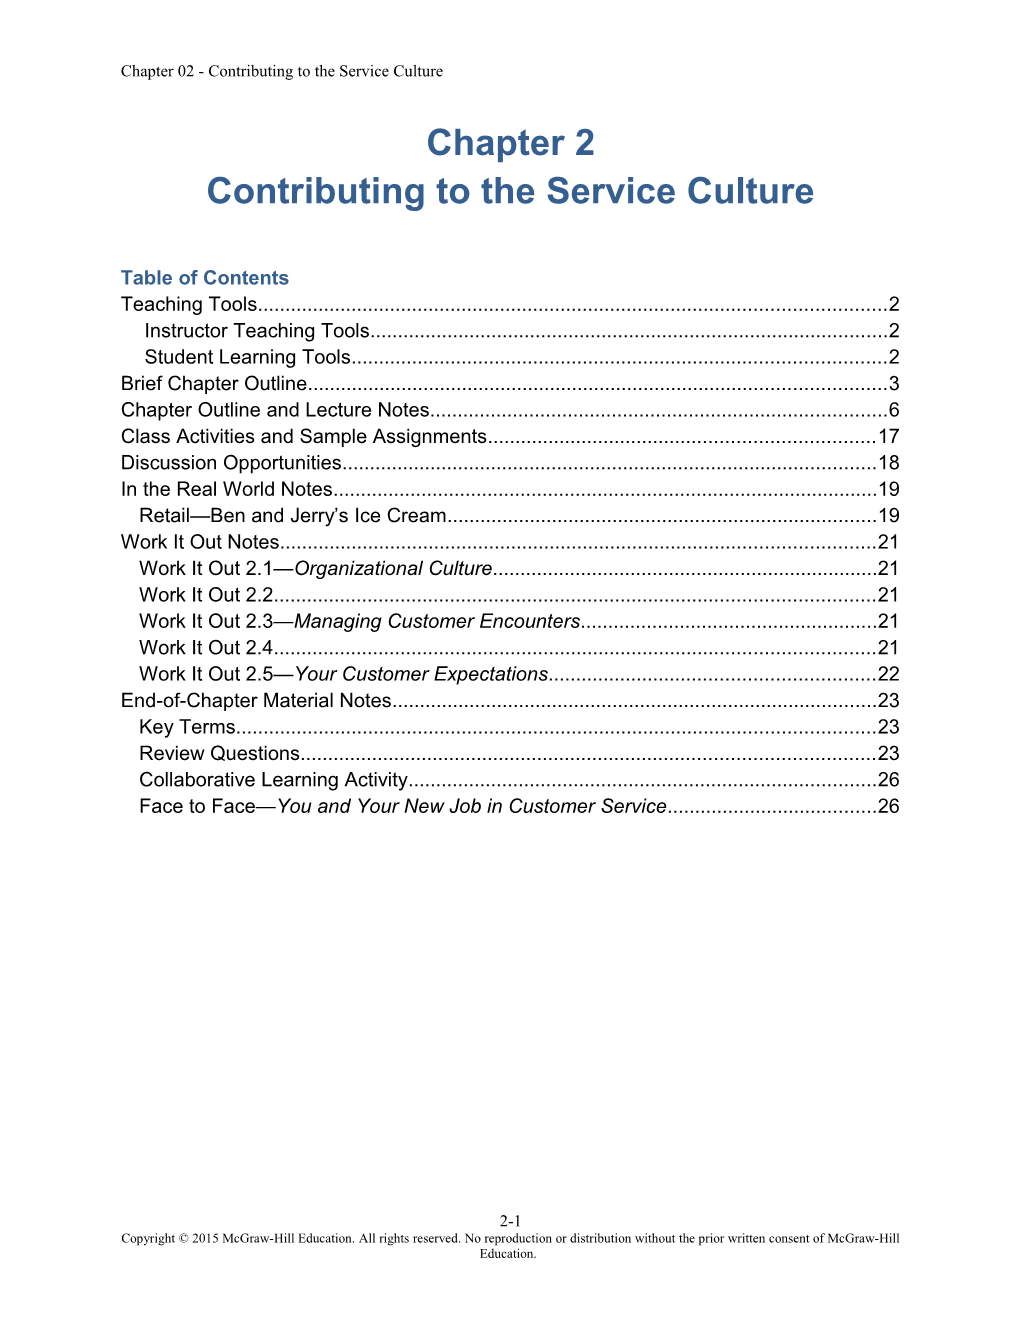 Chapter Two: Contributing to the Service Culture